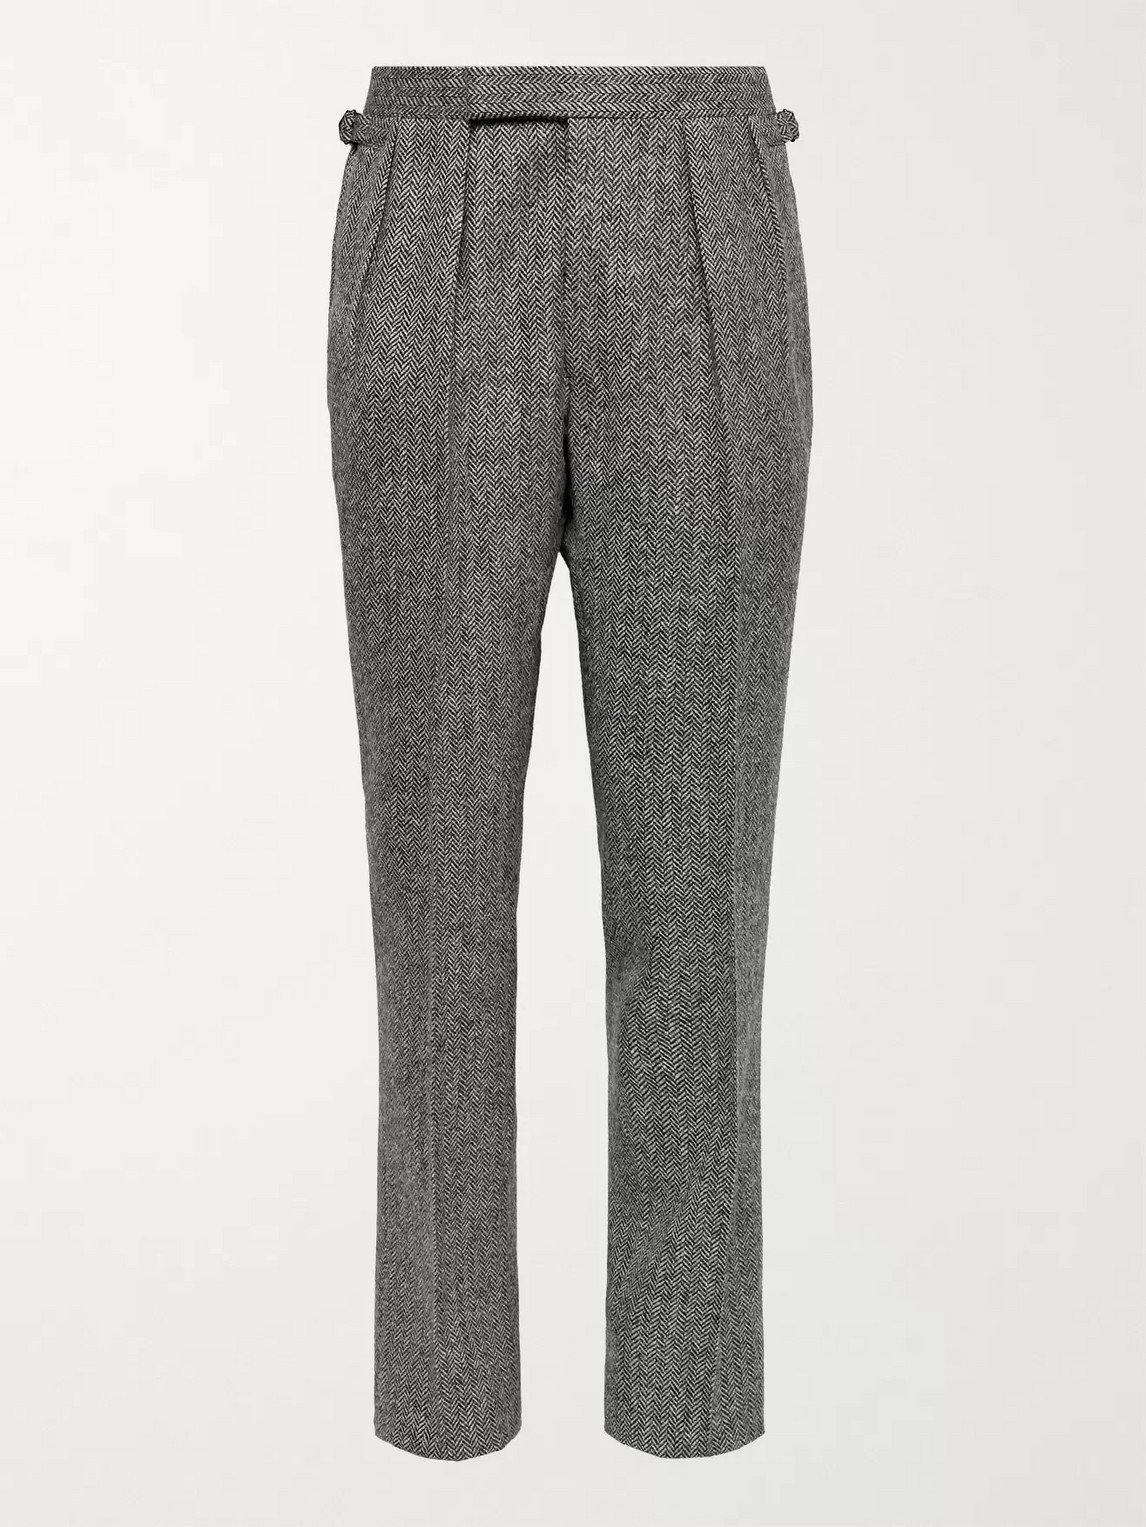 Aimé Leon Dore Martin Greenfield Slim-fit Pleated Checked Wool Suit Trousers In Gray